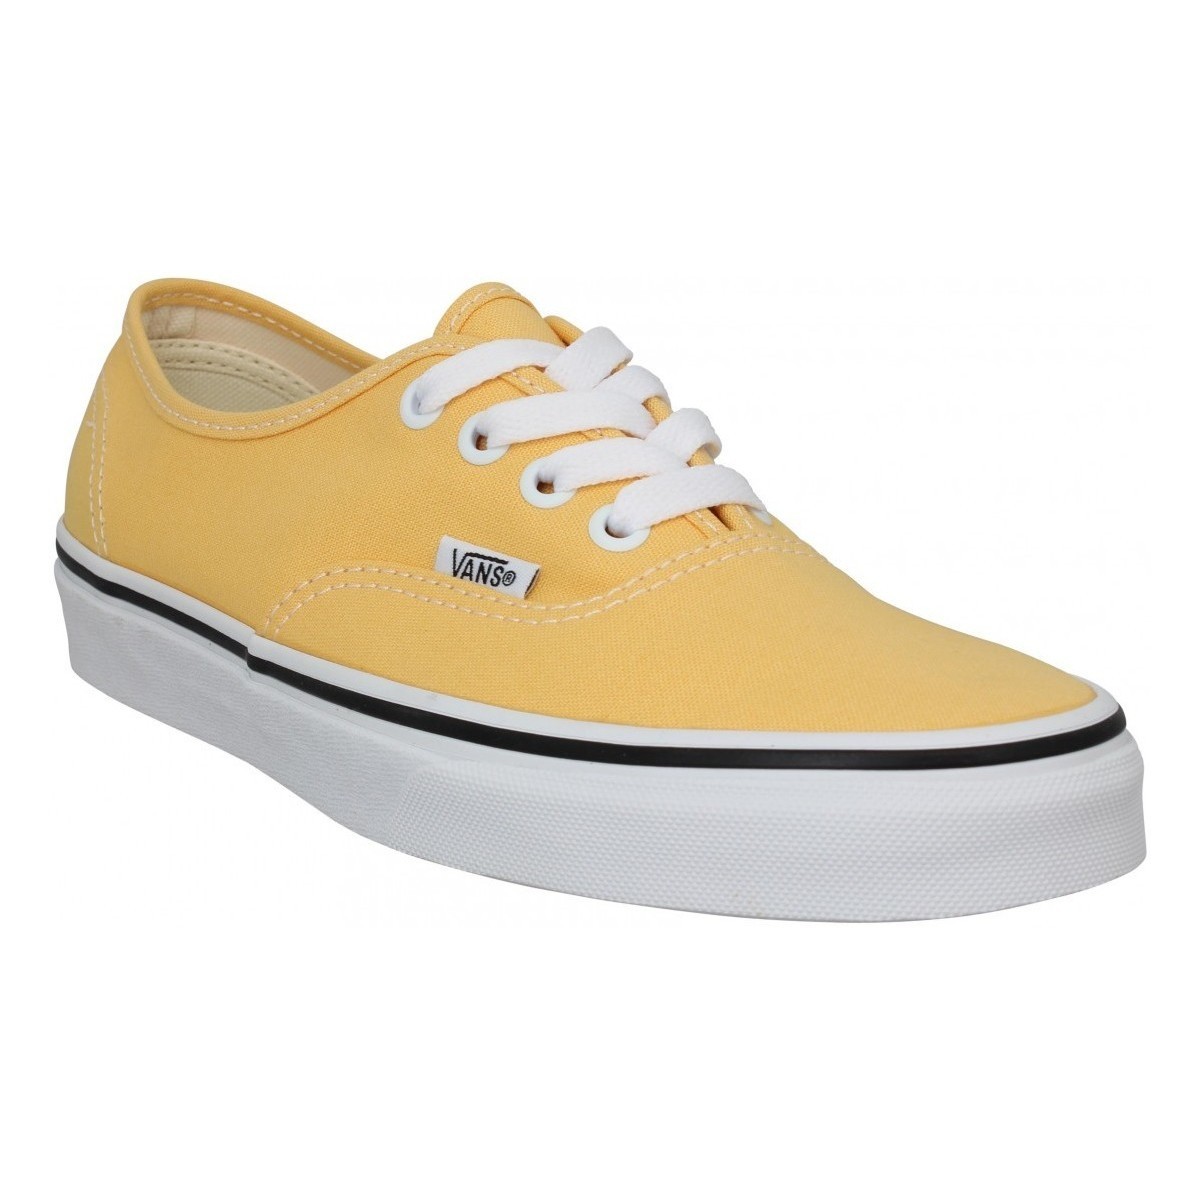 Sneakers Vans Authentic Toile Femme Flax